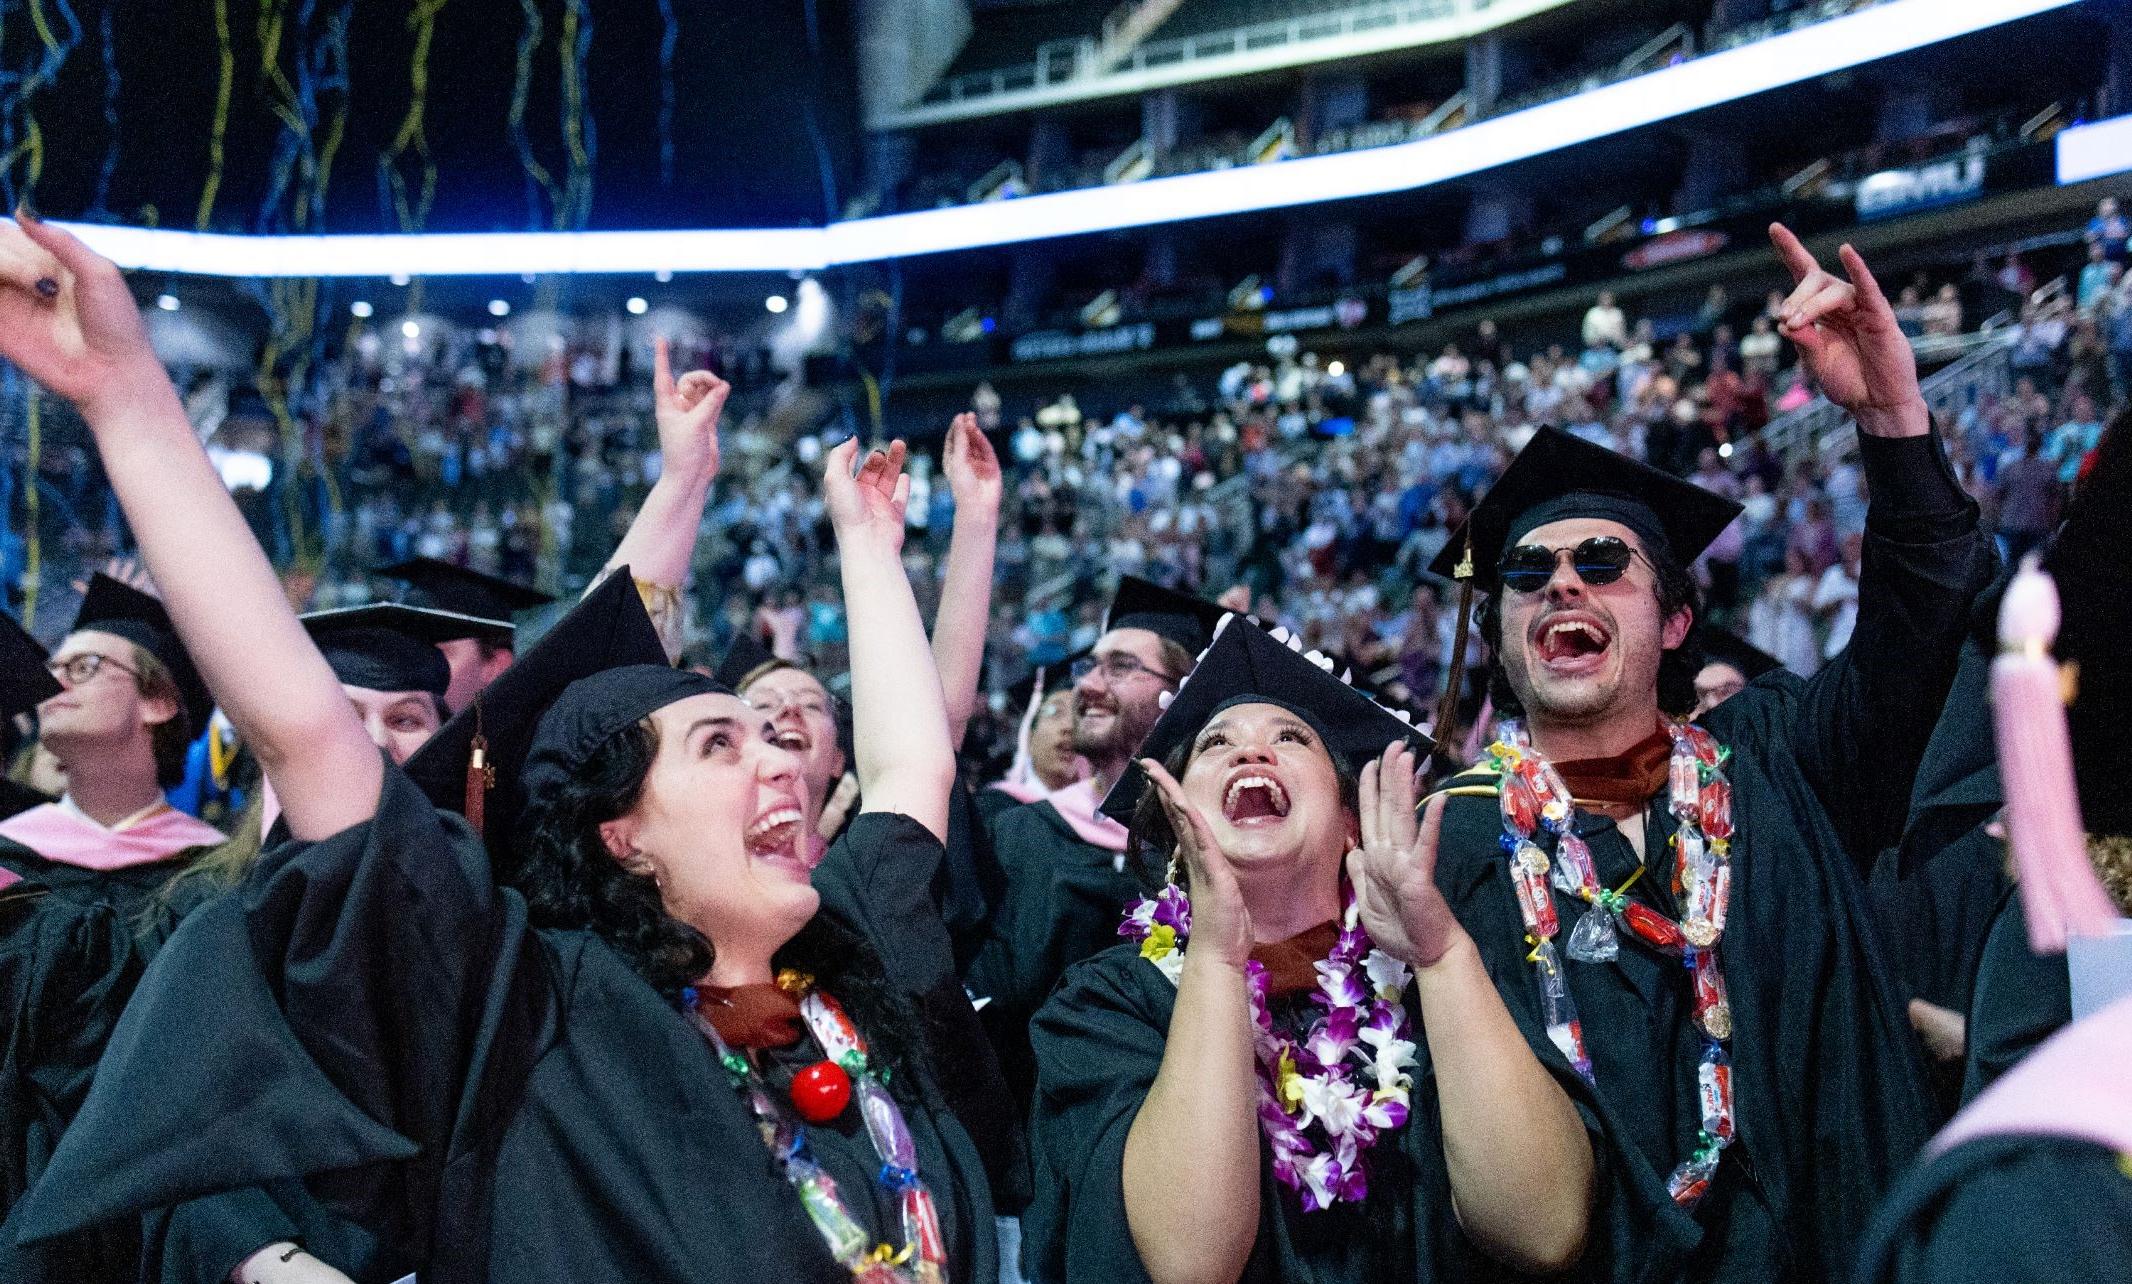 Graduates cheer and clap as streamers come down from the ceiling after commencement ceremony